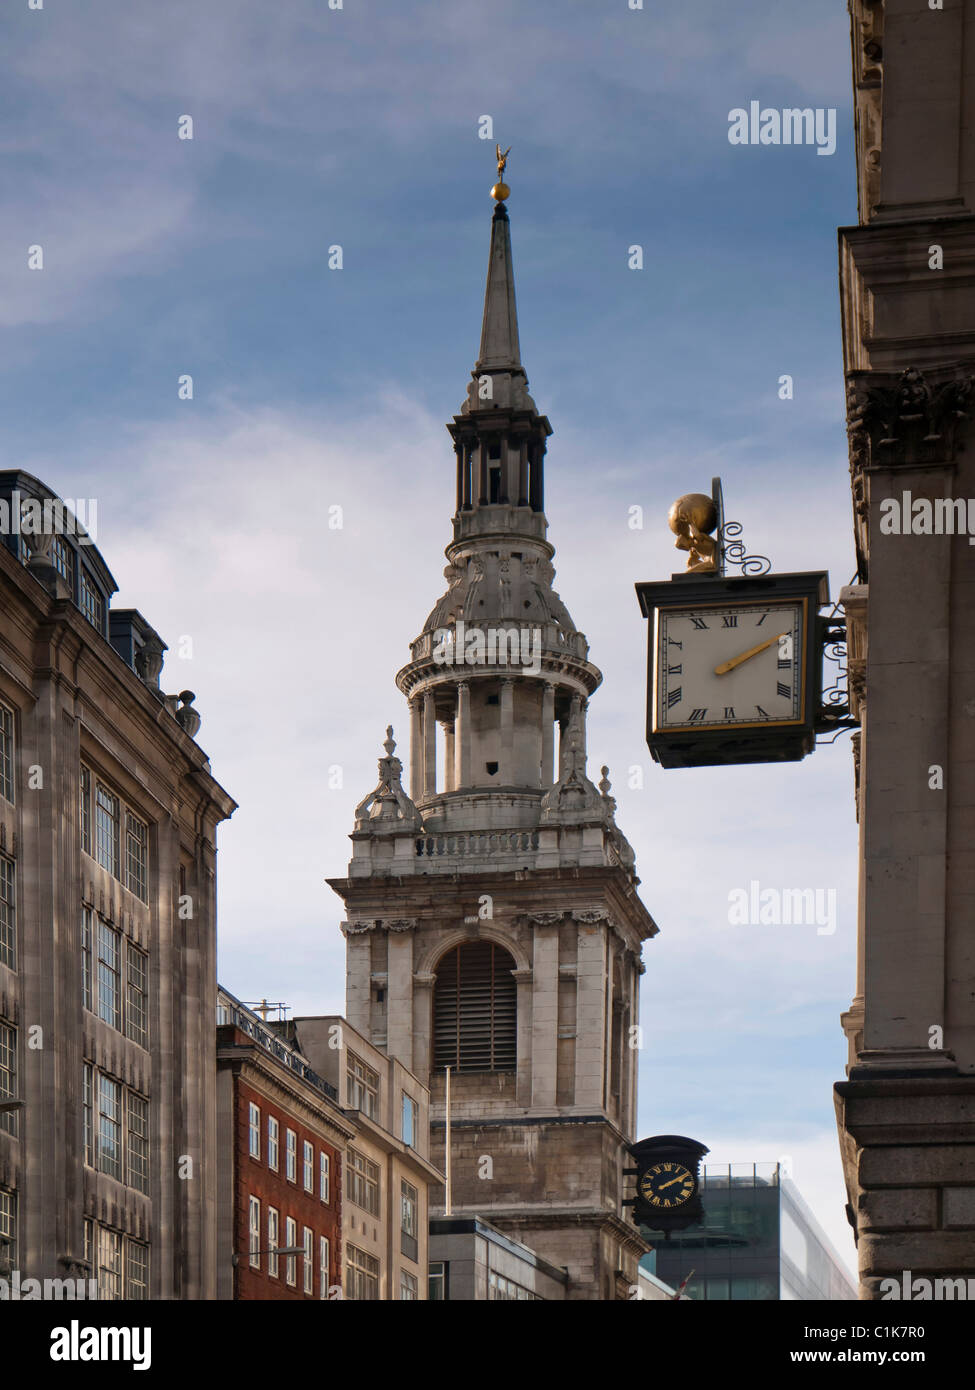 LONDON, UK - FEBRUARY 24, 2011:  The Tower of St Mary-le-Bow Church. Stock Photo